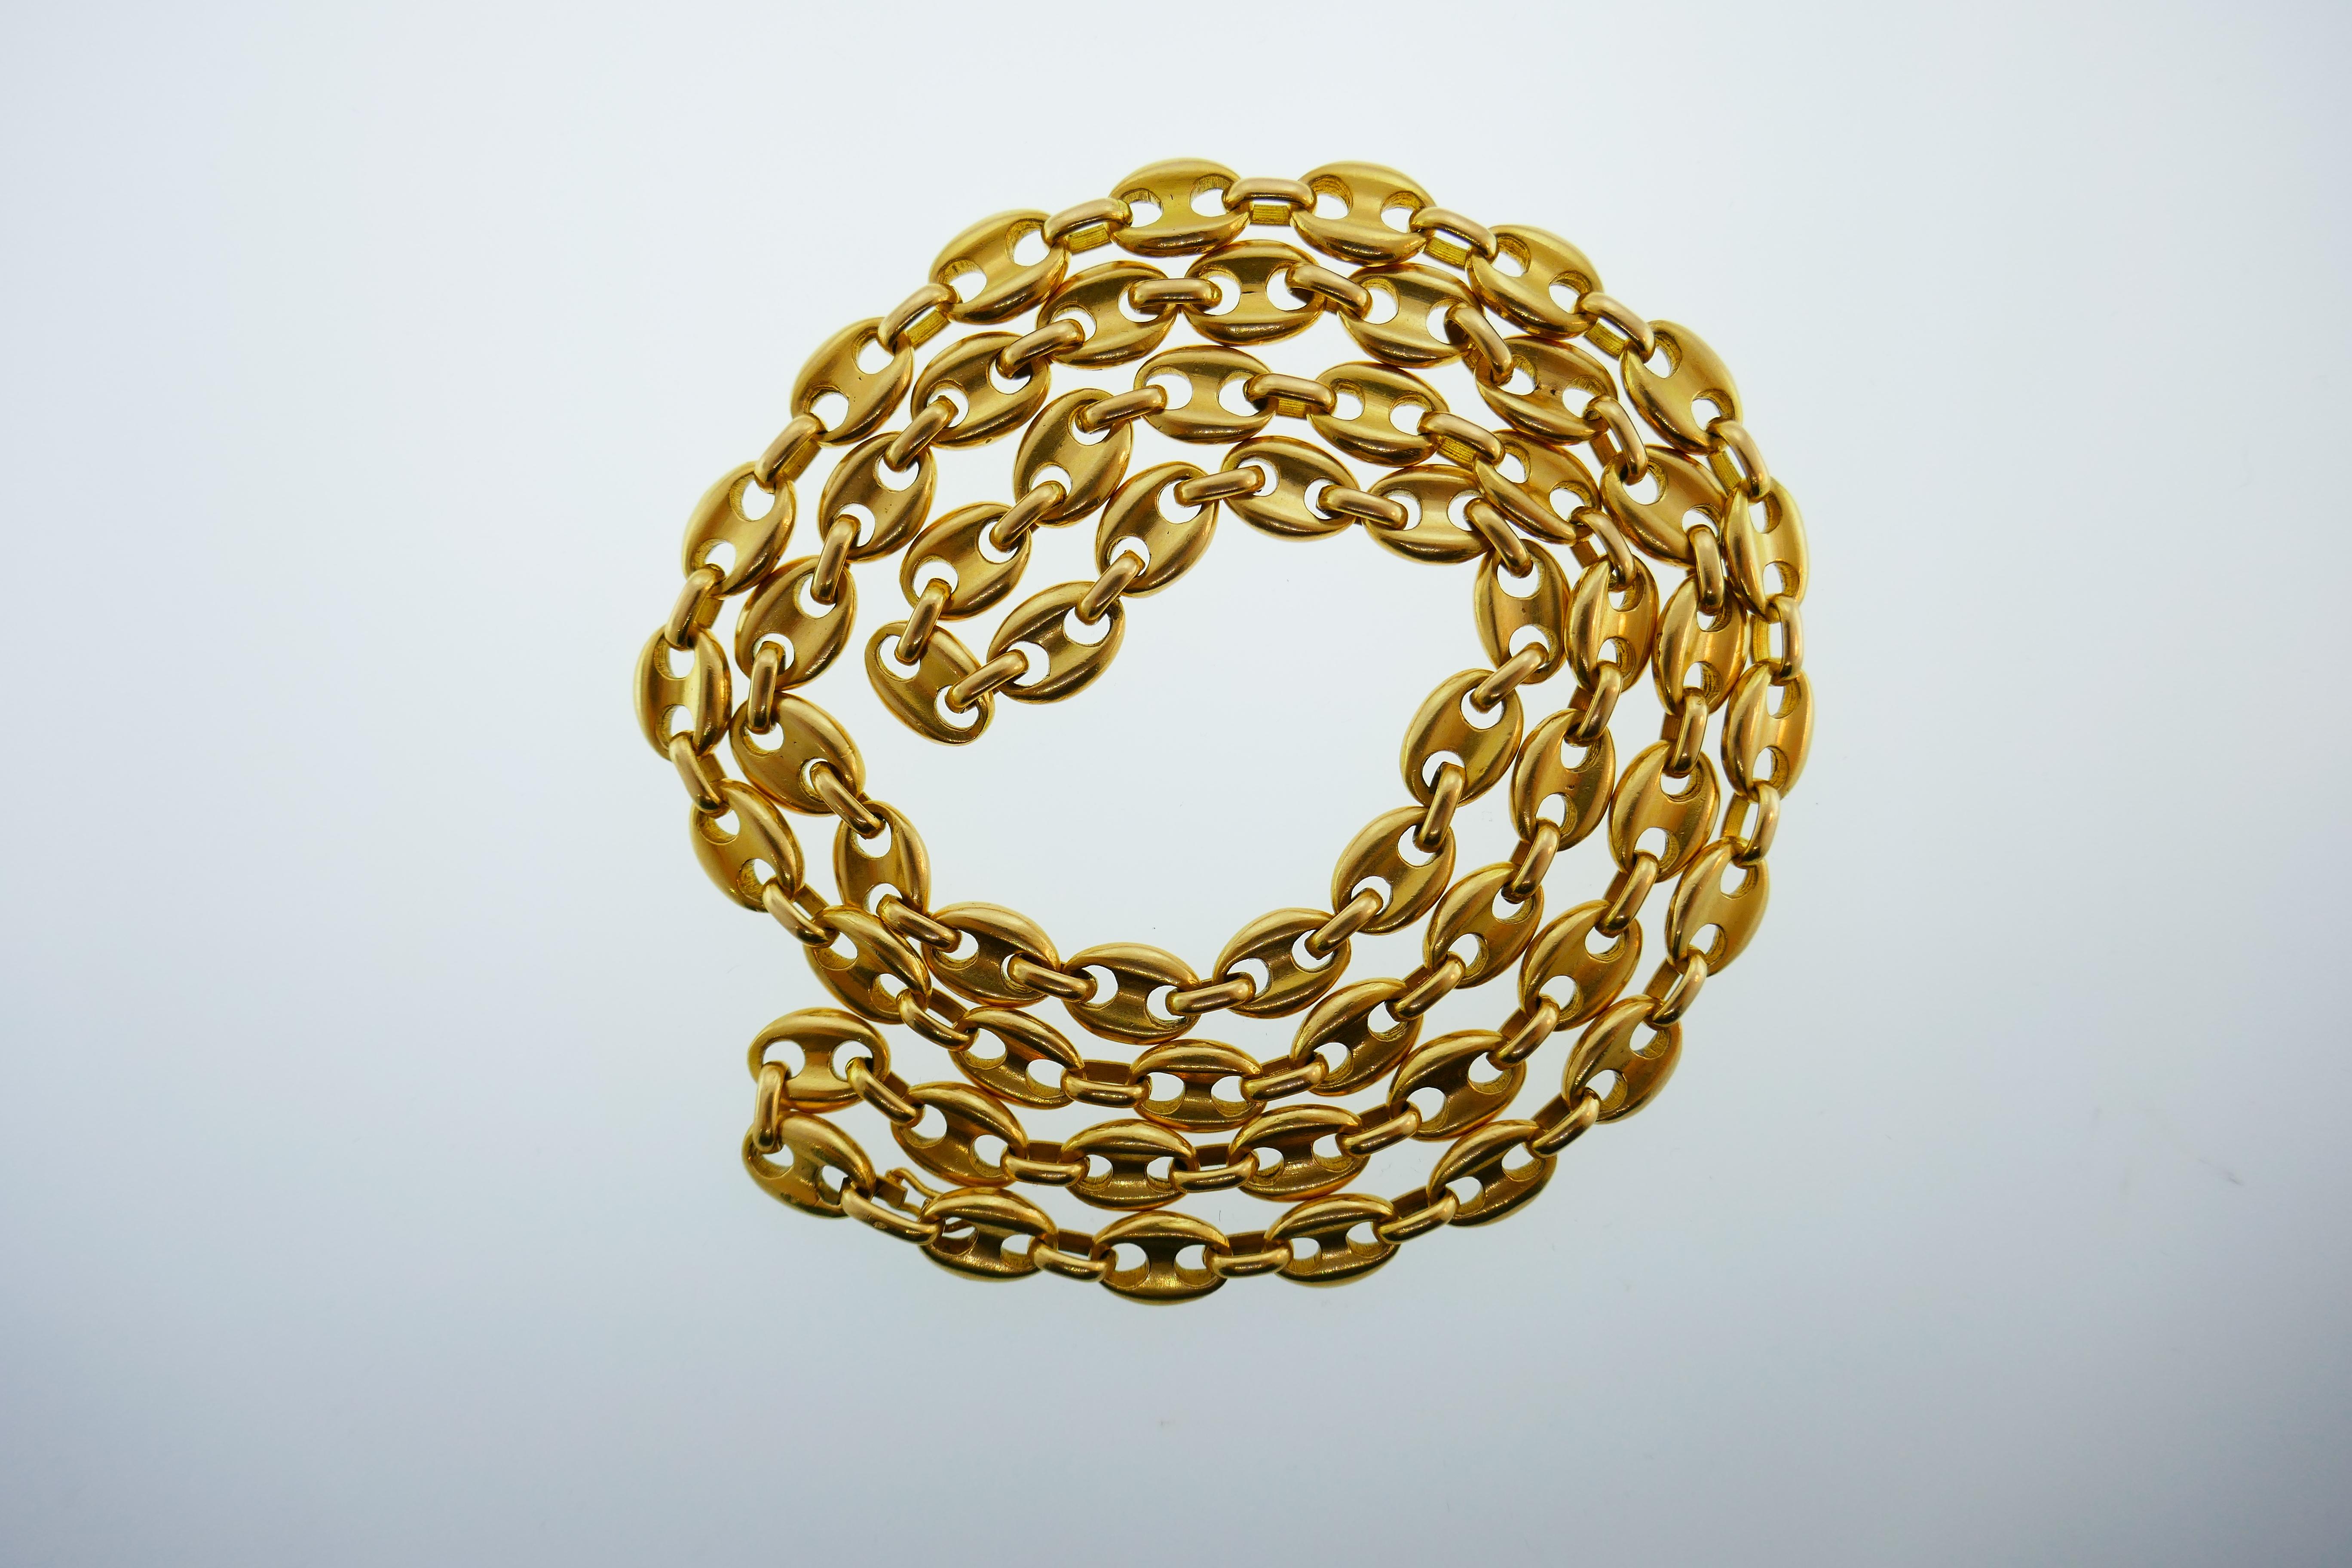 Made in France 18 Karat Yellow Gold Mariner Chain Necklace Vintage, circa 1970s 2